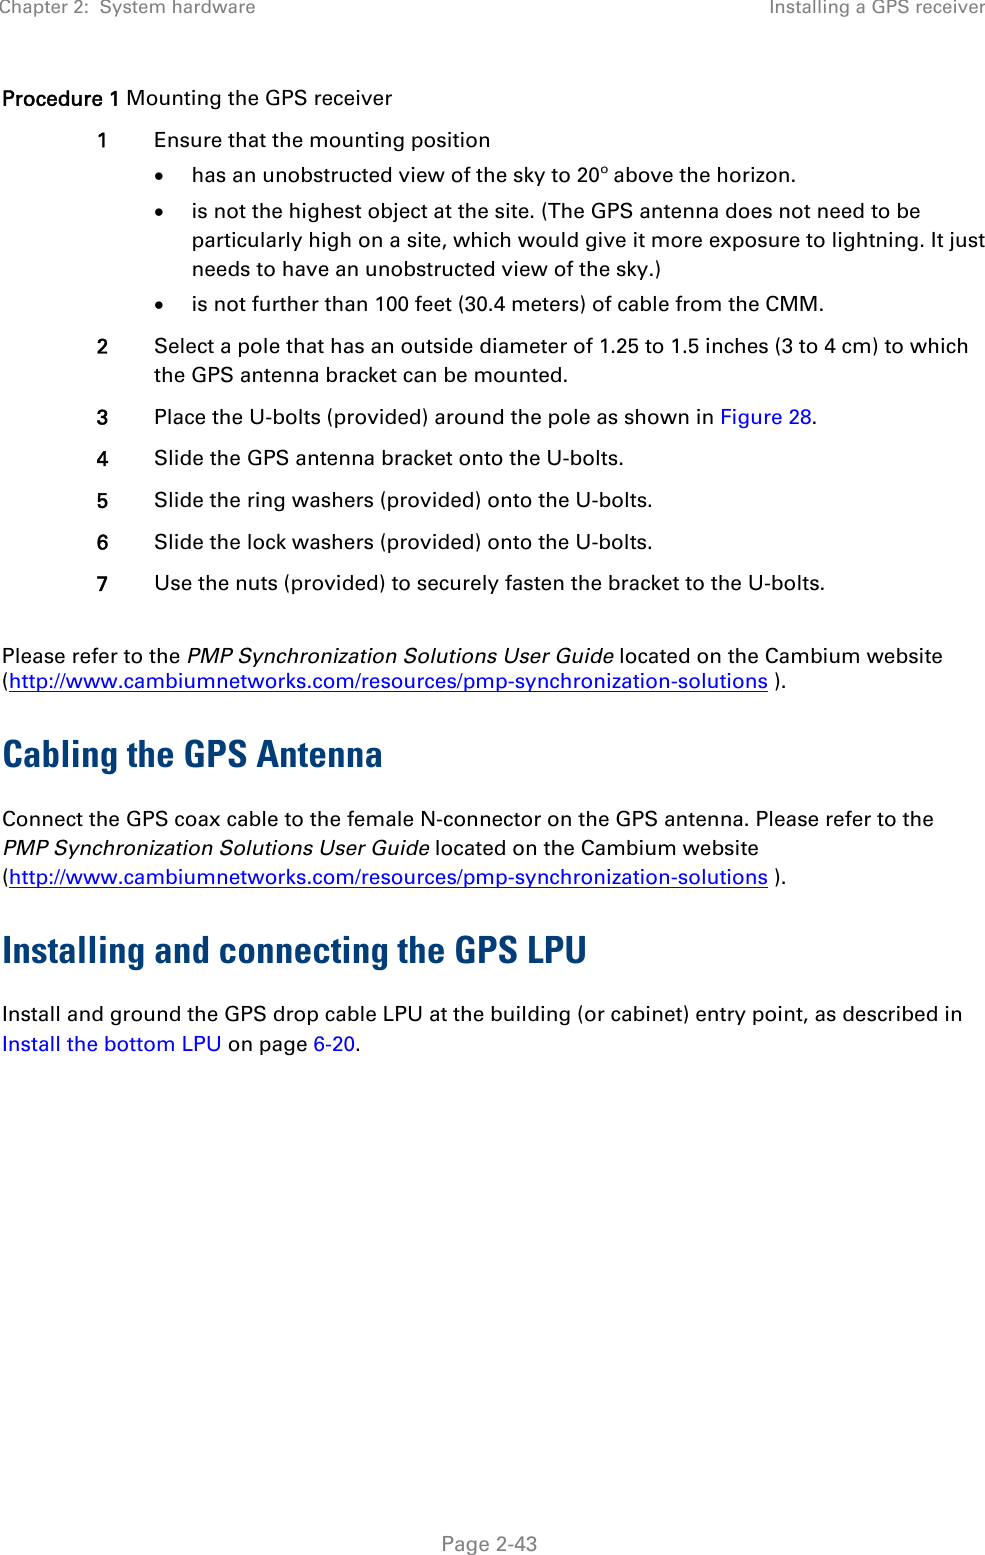 Chapter 2:  System hardware  Installing a GPS receiver   Page 2-43 Procedure 1 Mounting the GPS receiver 1  Ensure that the mounting position  has an unobstructed view of the sky to 20º above the horizon.  is not the highest object at the site. (The GPS antenna does not need to be particularly high on a site, which would give it more exposure to lightning. It just needs to have an unobstructed view of the sky.)  is not further than 100 feet (30.4 meters) of cable from the CMM. 2  Select a pole that has an outside diameter of 1.25 to 1.5 inches (3 to 4 cm) to which the GPS antenna bracket can be mounted. 3  Place the U-bolts (provided) around the pole as shown in Figure 28. 4  Slide the GPS antenna bracket onto the U-bolts. 5  Slide the ring washers (provided) onto the U-bolts. 6  Slide the lock washers (provided) onto the U-bolts. 7  Use the nuts (provided) to securely fasten the bracket to the U-bolts.  Please refer to the PMP Synchronization Solutions User Guide located on the Cambium website (http://www.cambiumnetworks.com/resources/pmp-synchronization-solutions ). Cabling the GPS Antenna Connect the GPS coax cable to the female N-connector on the GPS antenna. Please refer to the PMP Synchronization Solutions User Guide located on the Cambium website (http://www.cambiumnetworks.com/resources/pmp-synchronization-solutions ). Installing and connecting the GPS LPU Install and ground the GPS drop cable LPU at the building (or cabinet) entry point, as described in Install the bottom LPU on page 6-20.  